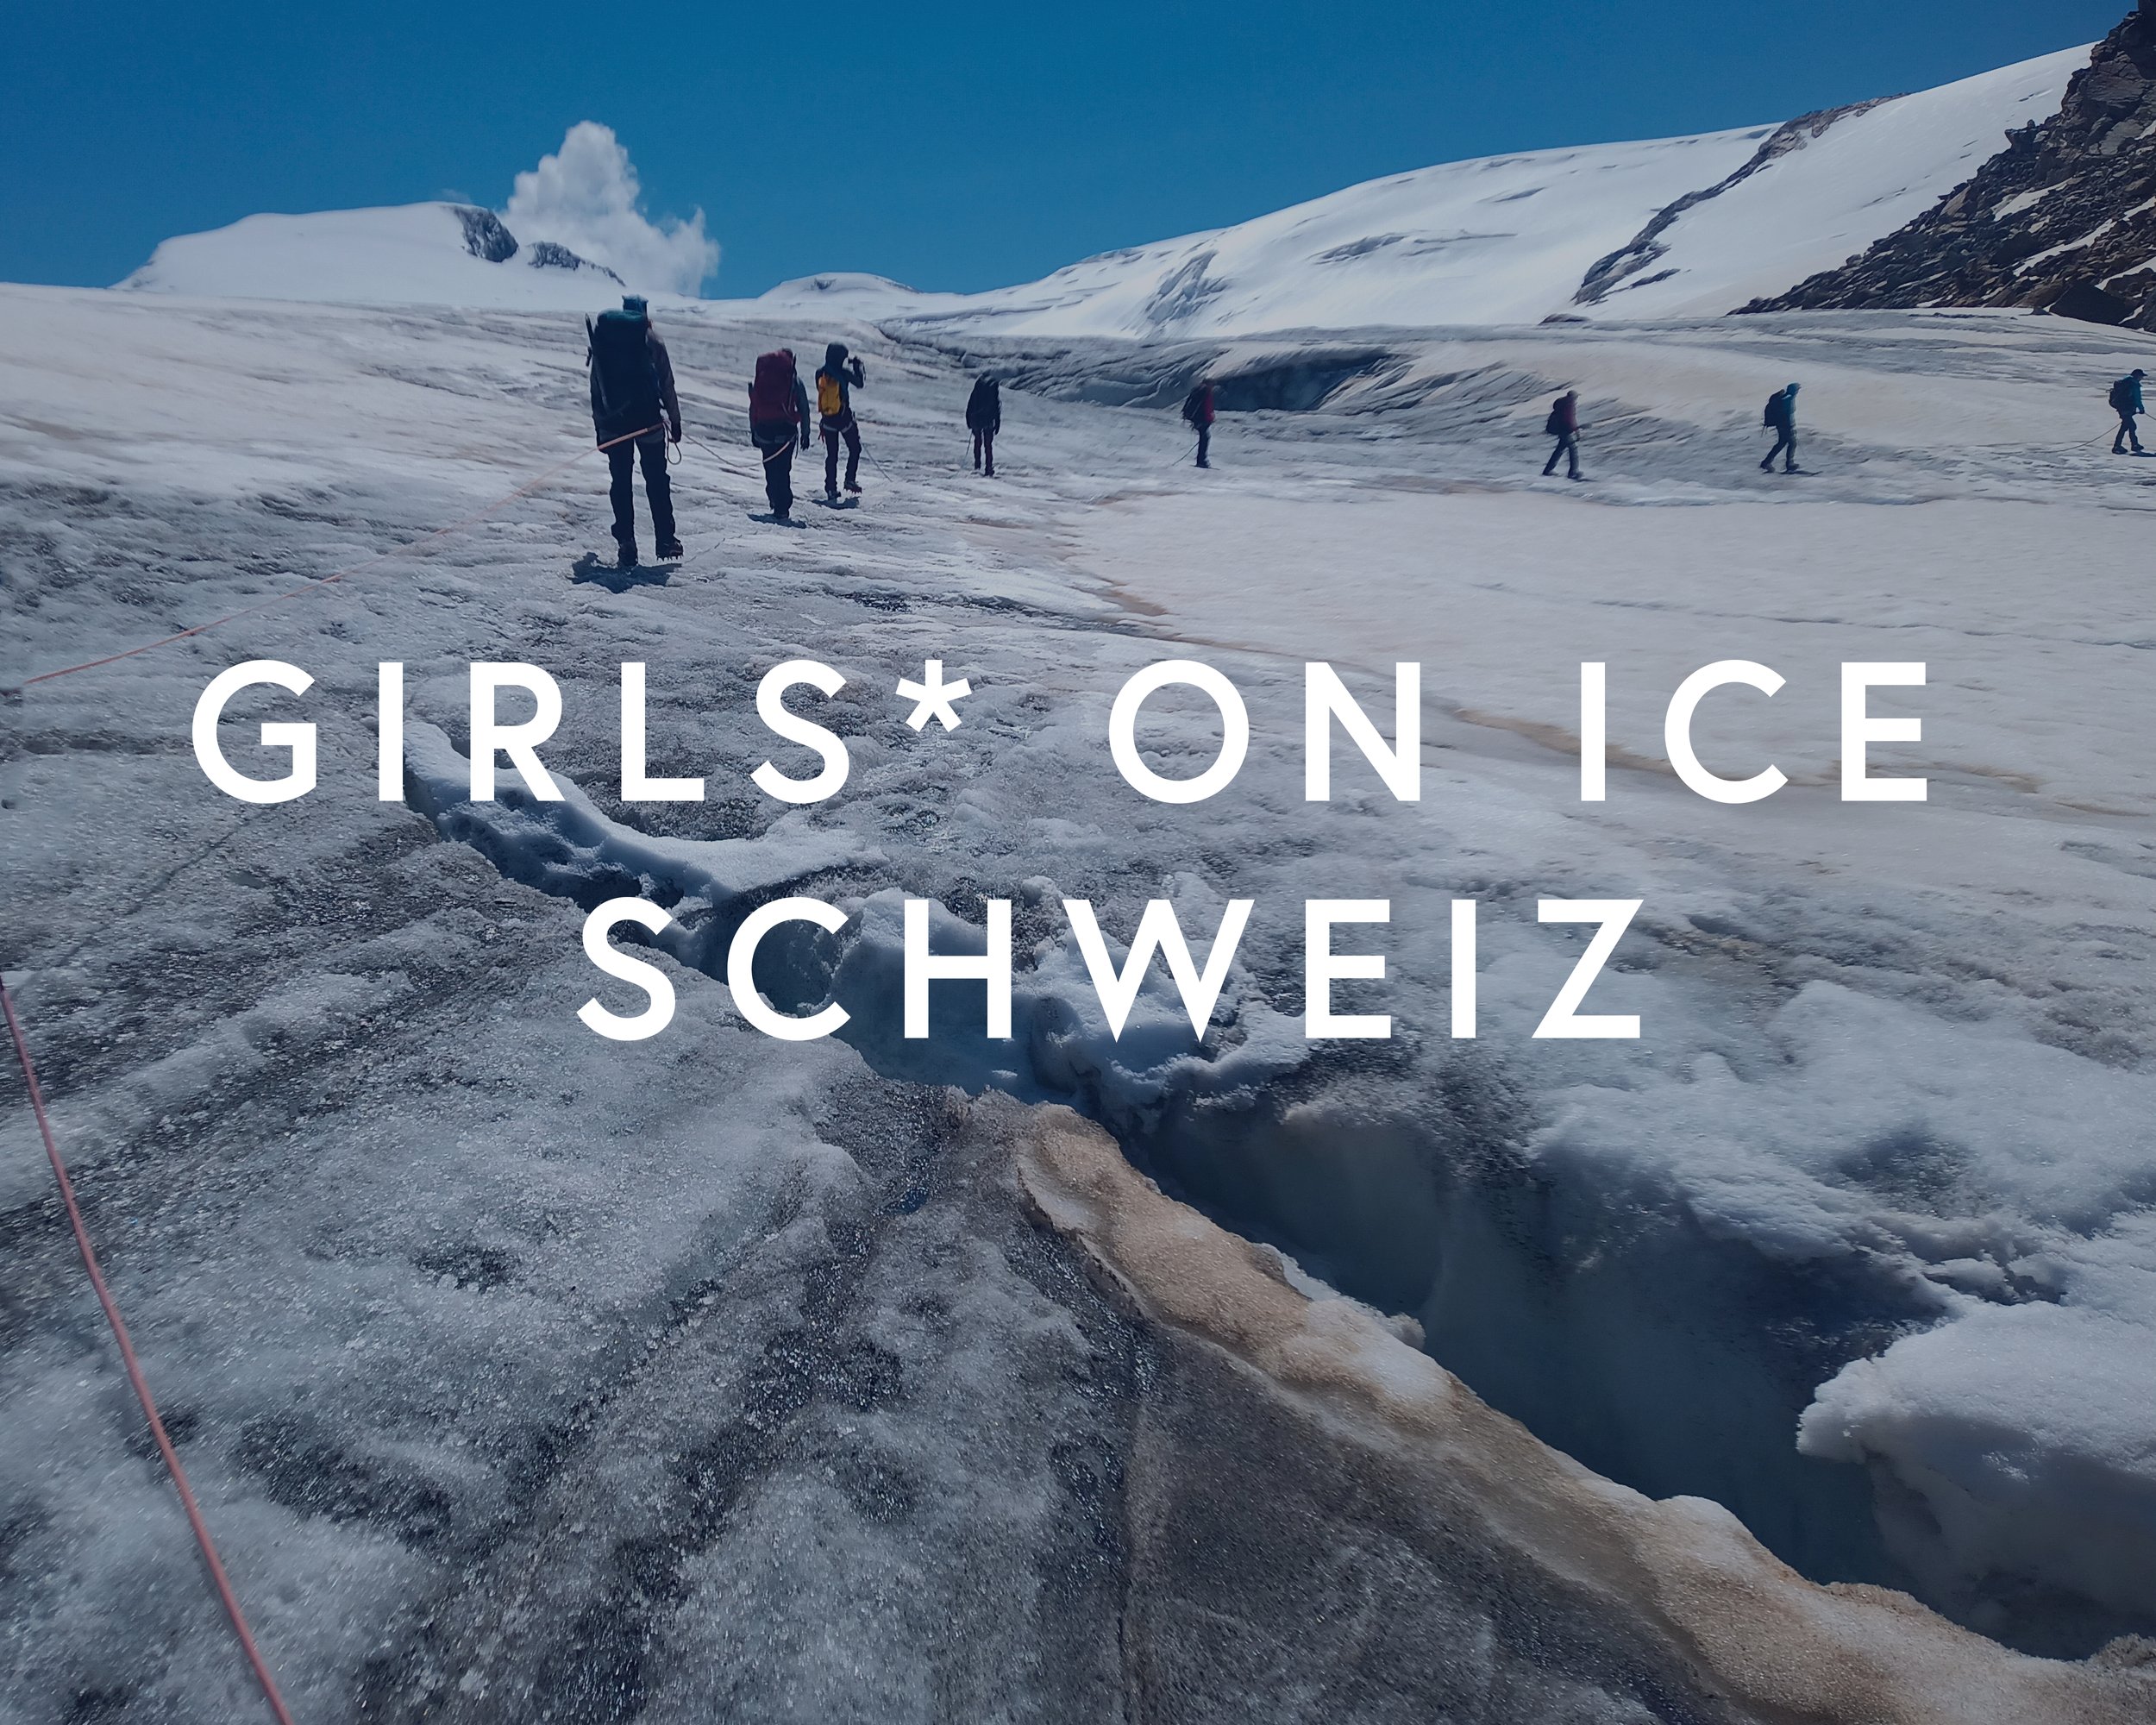 Image links to the Girls* on ice schewiz expedition info page (Copy)